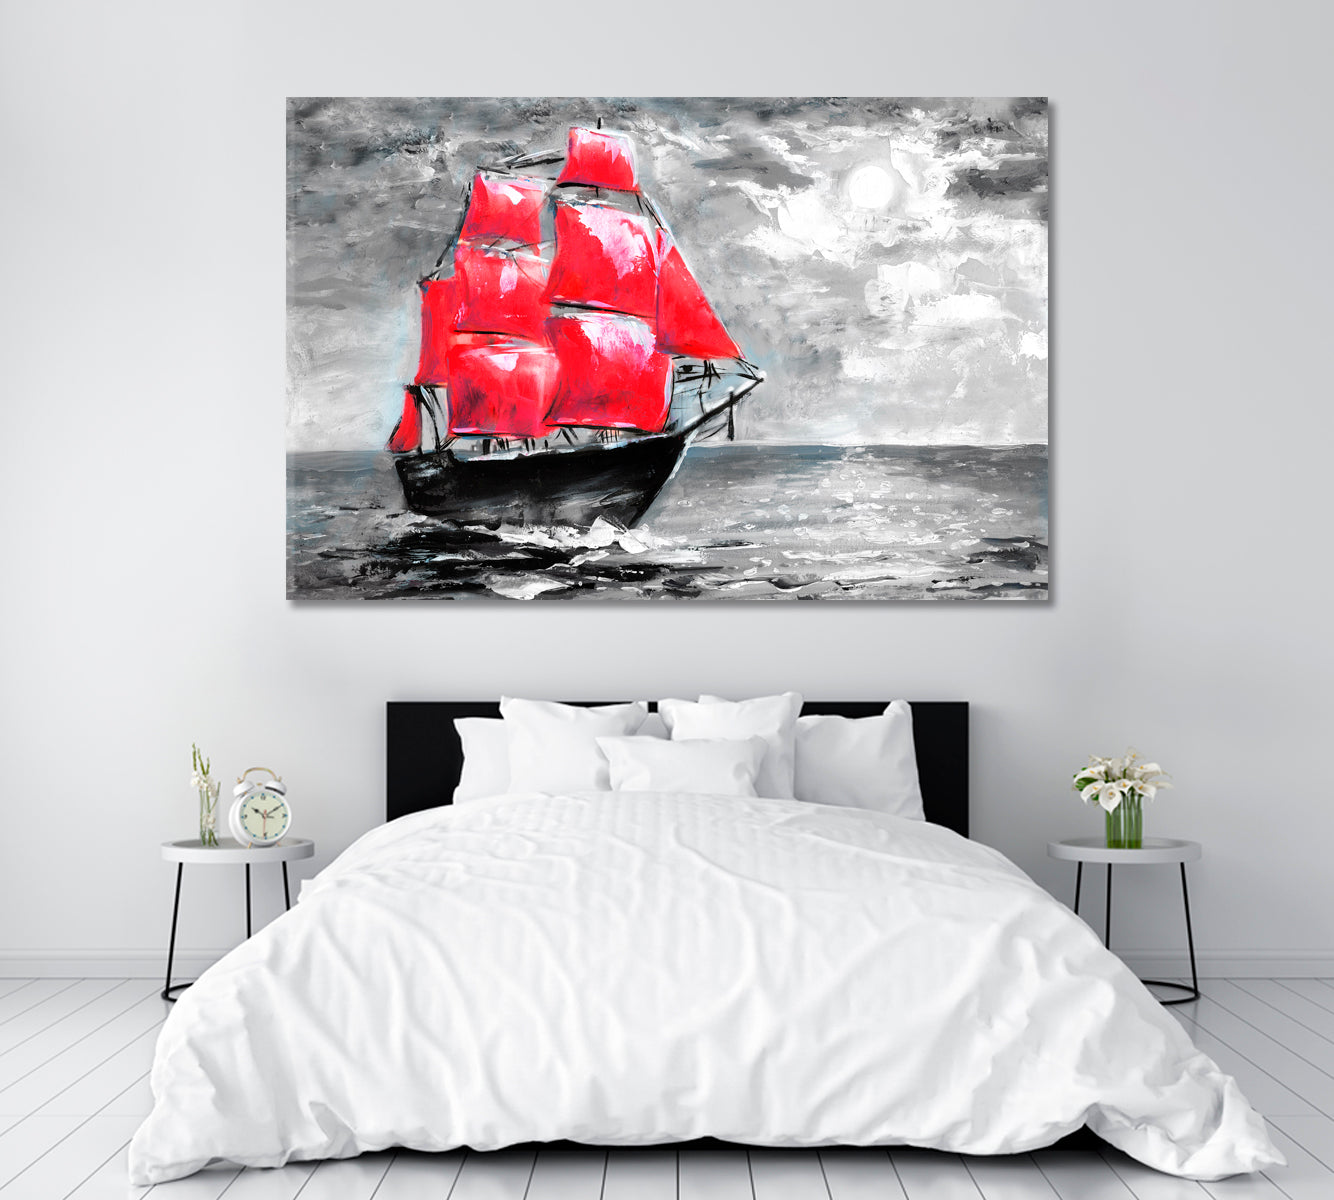 Scarlet Sails Canvas Print ArtLexy 1 Panel 24"x16" inches 